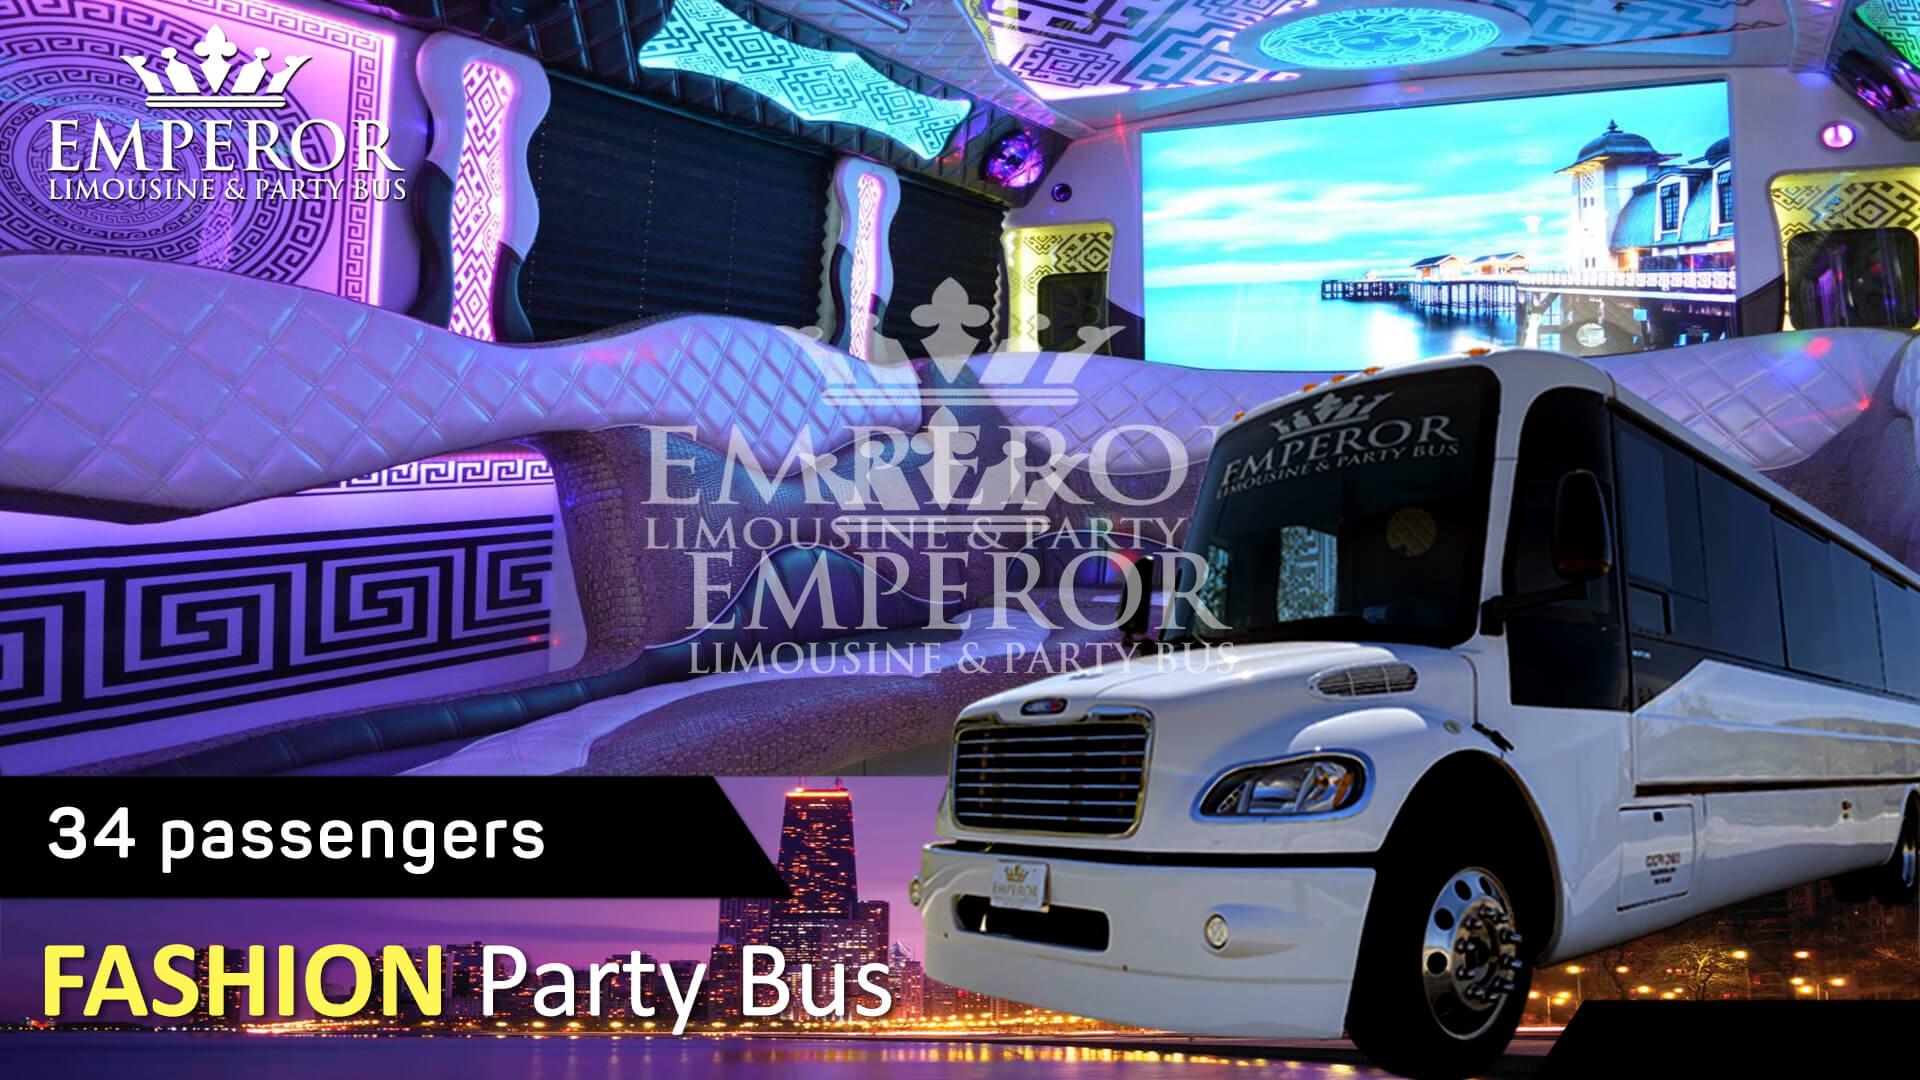 Party bus service in Arlington Heights - Fashion Edition